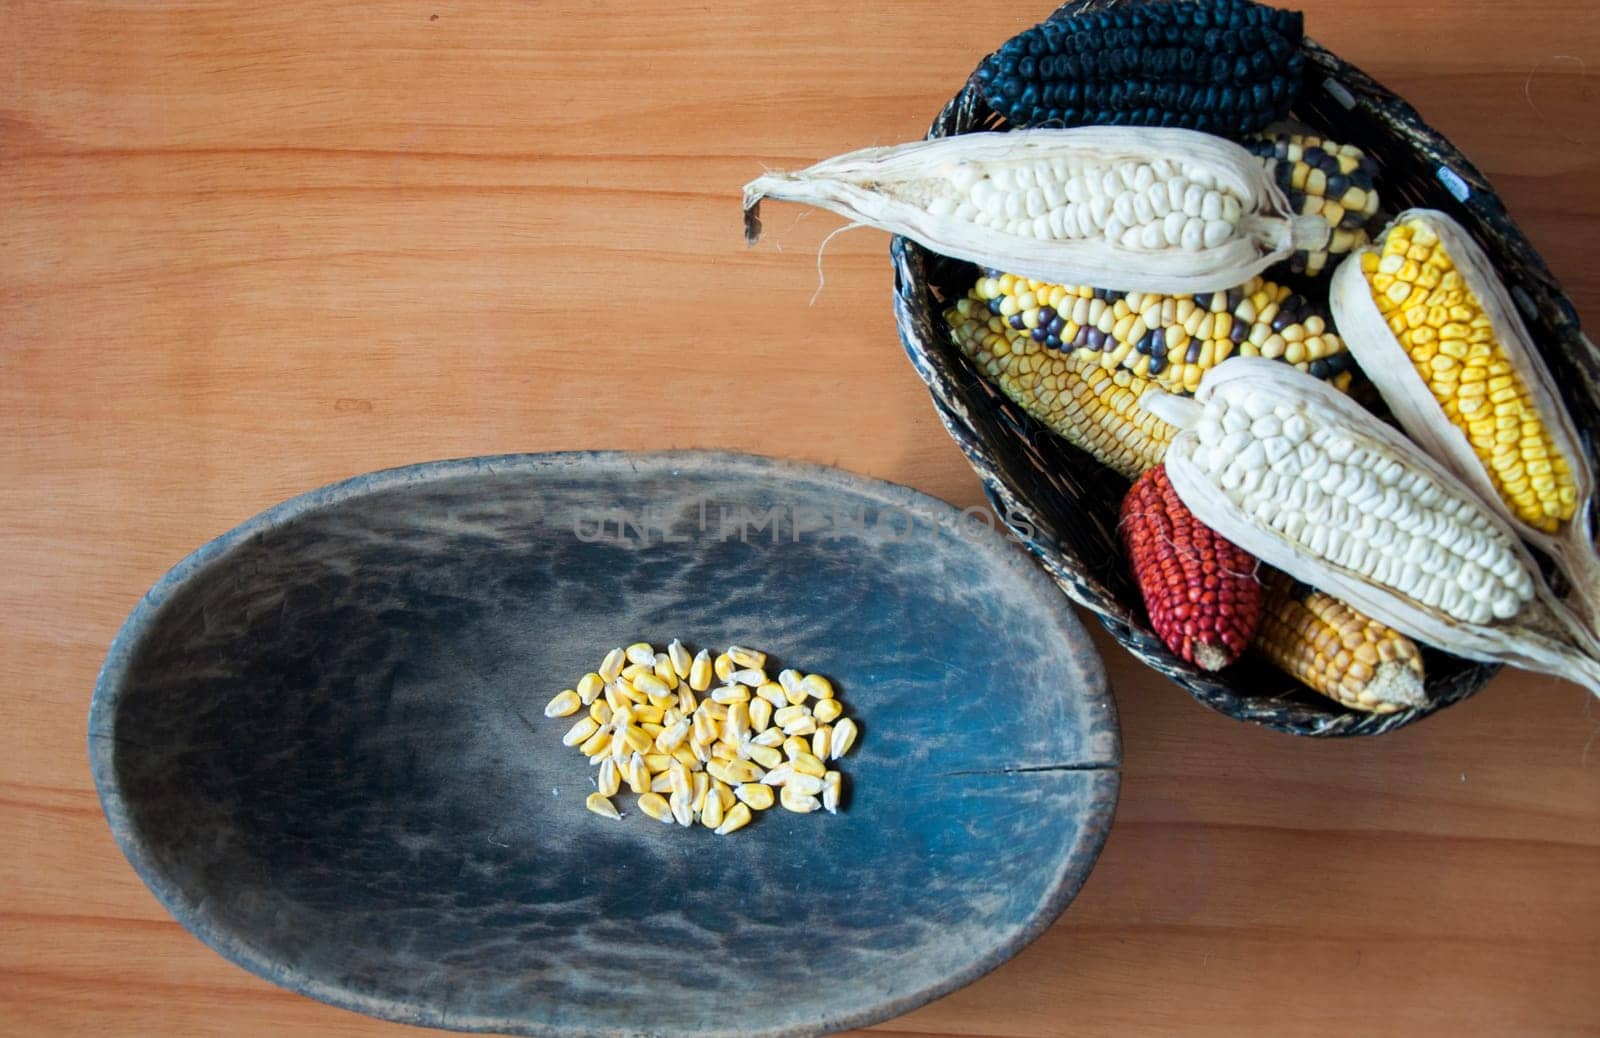 Plated in wooden bowls on a table of the different types of corn that exist in Ecuador. High quality photo